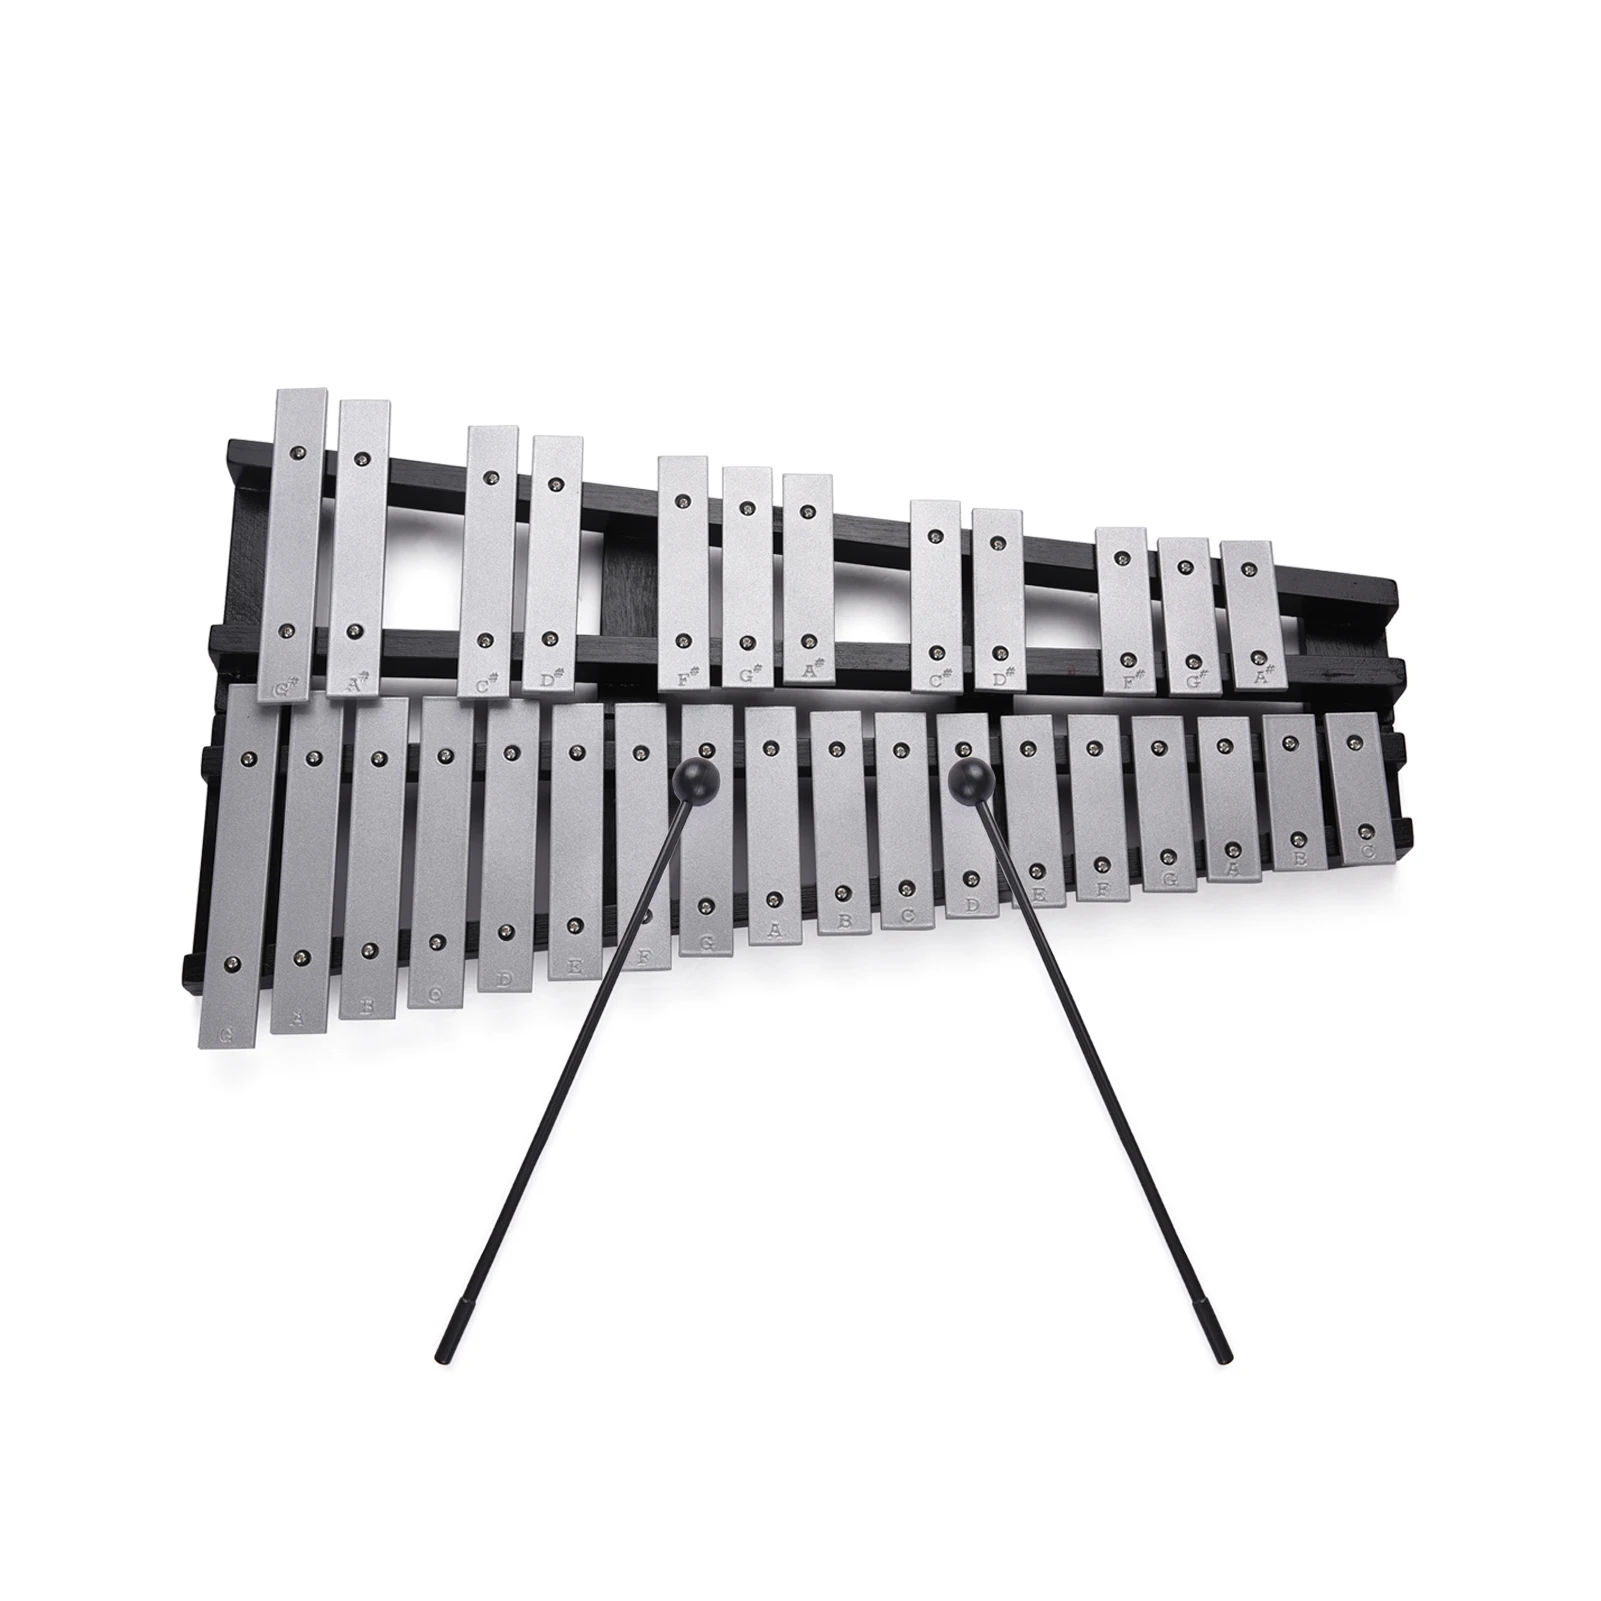 Professional Glockenspiel Xylophone Percussion Instrument with Wood Base and 30 Metal Keys TABODD 30-Note Foldable Glockenspiel Xylophone 2 Mallets Carrying Bag for Adults and Kids 